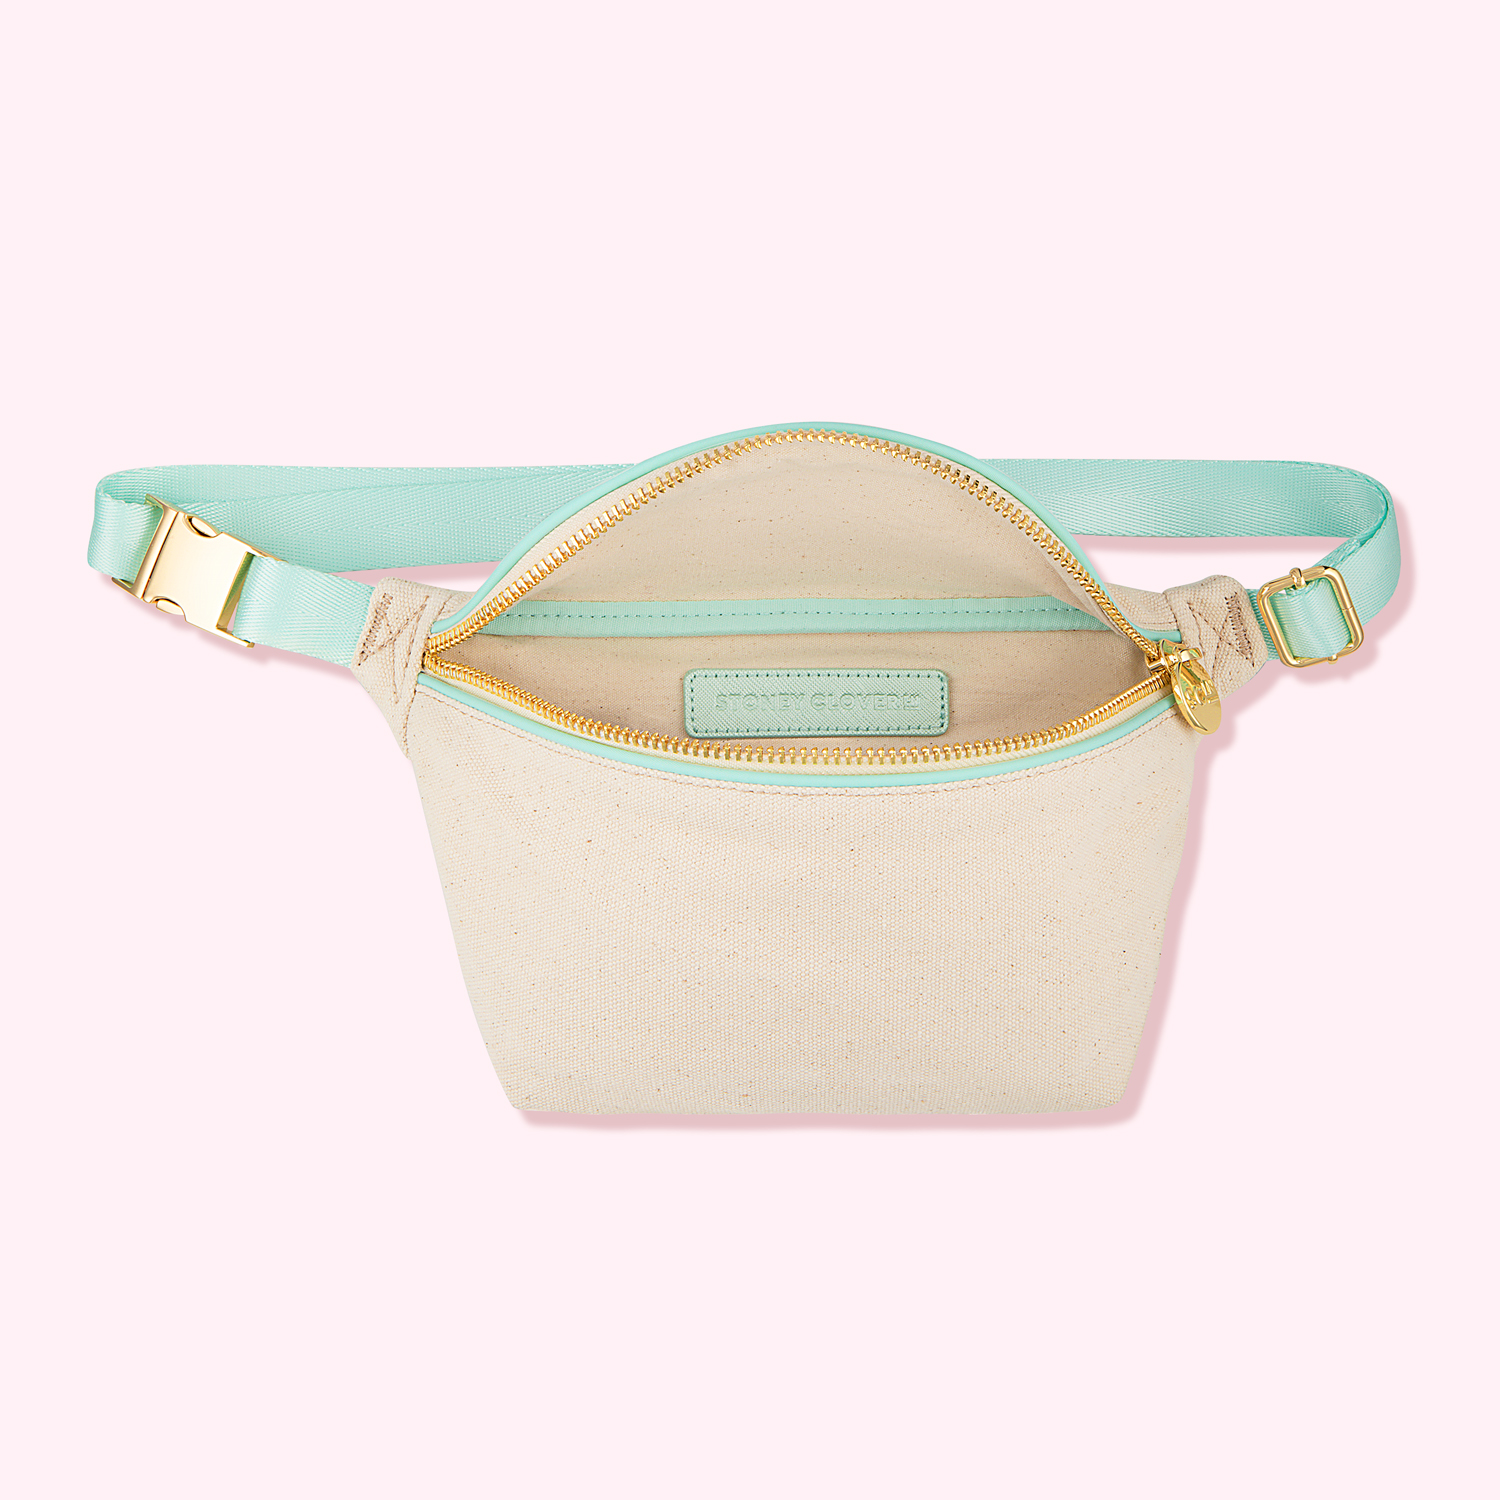 Clare V. Has quickly become one of my all time favorite brands and th, Belt Bag